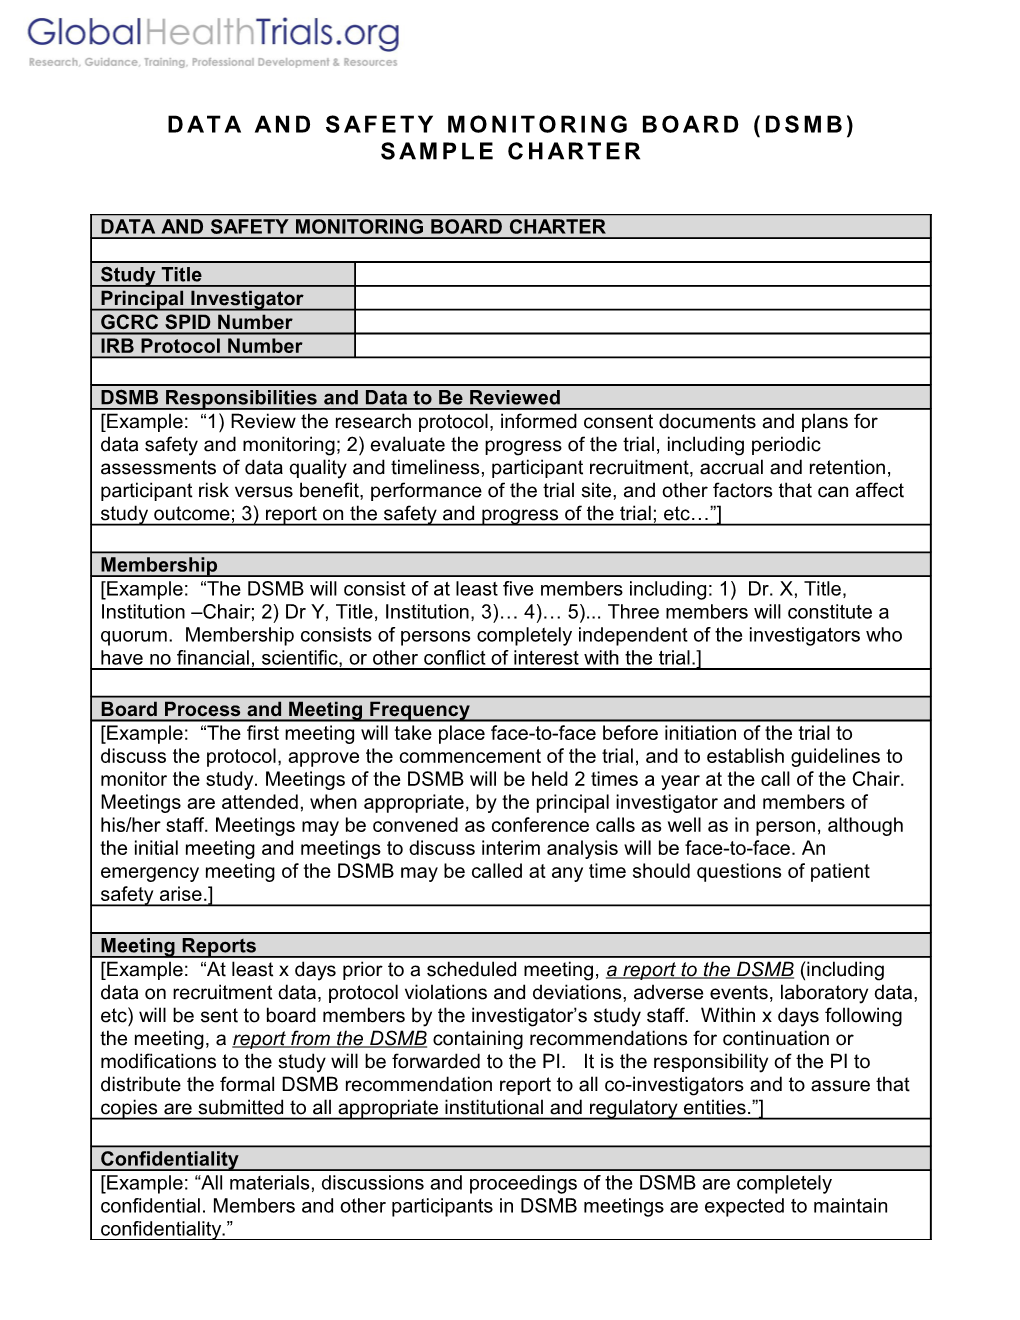 Data and Safety Monitoring Board Charter